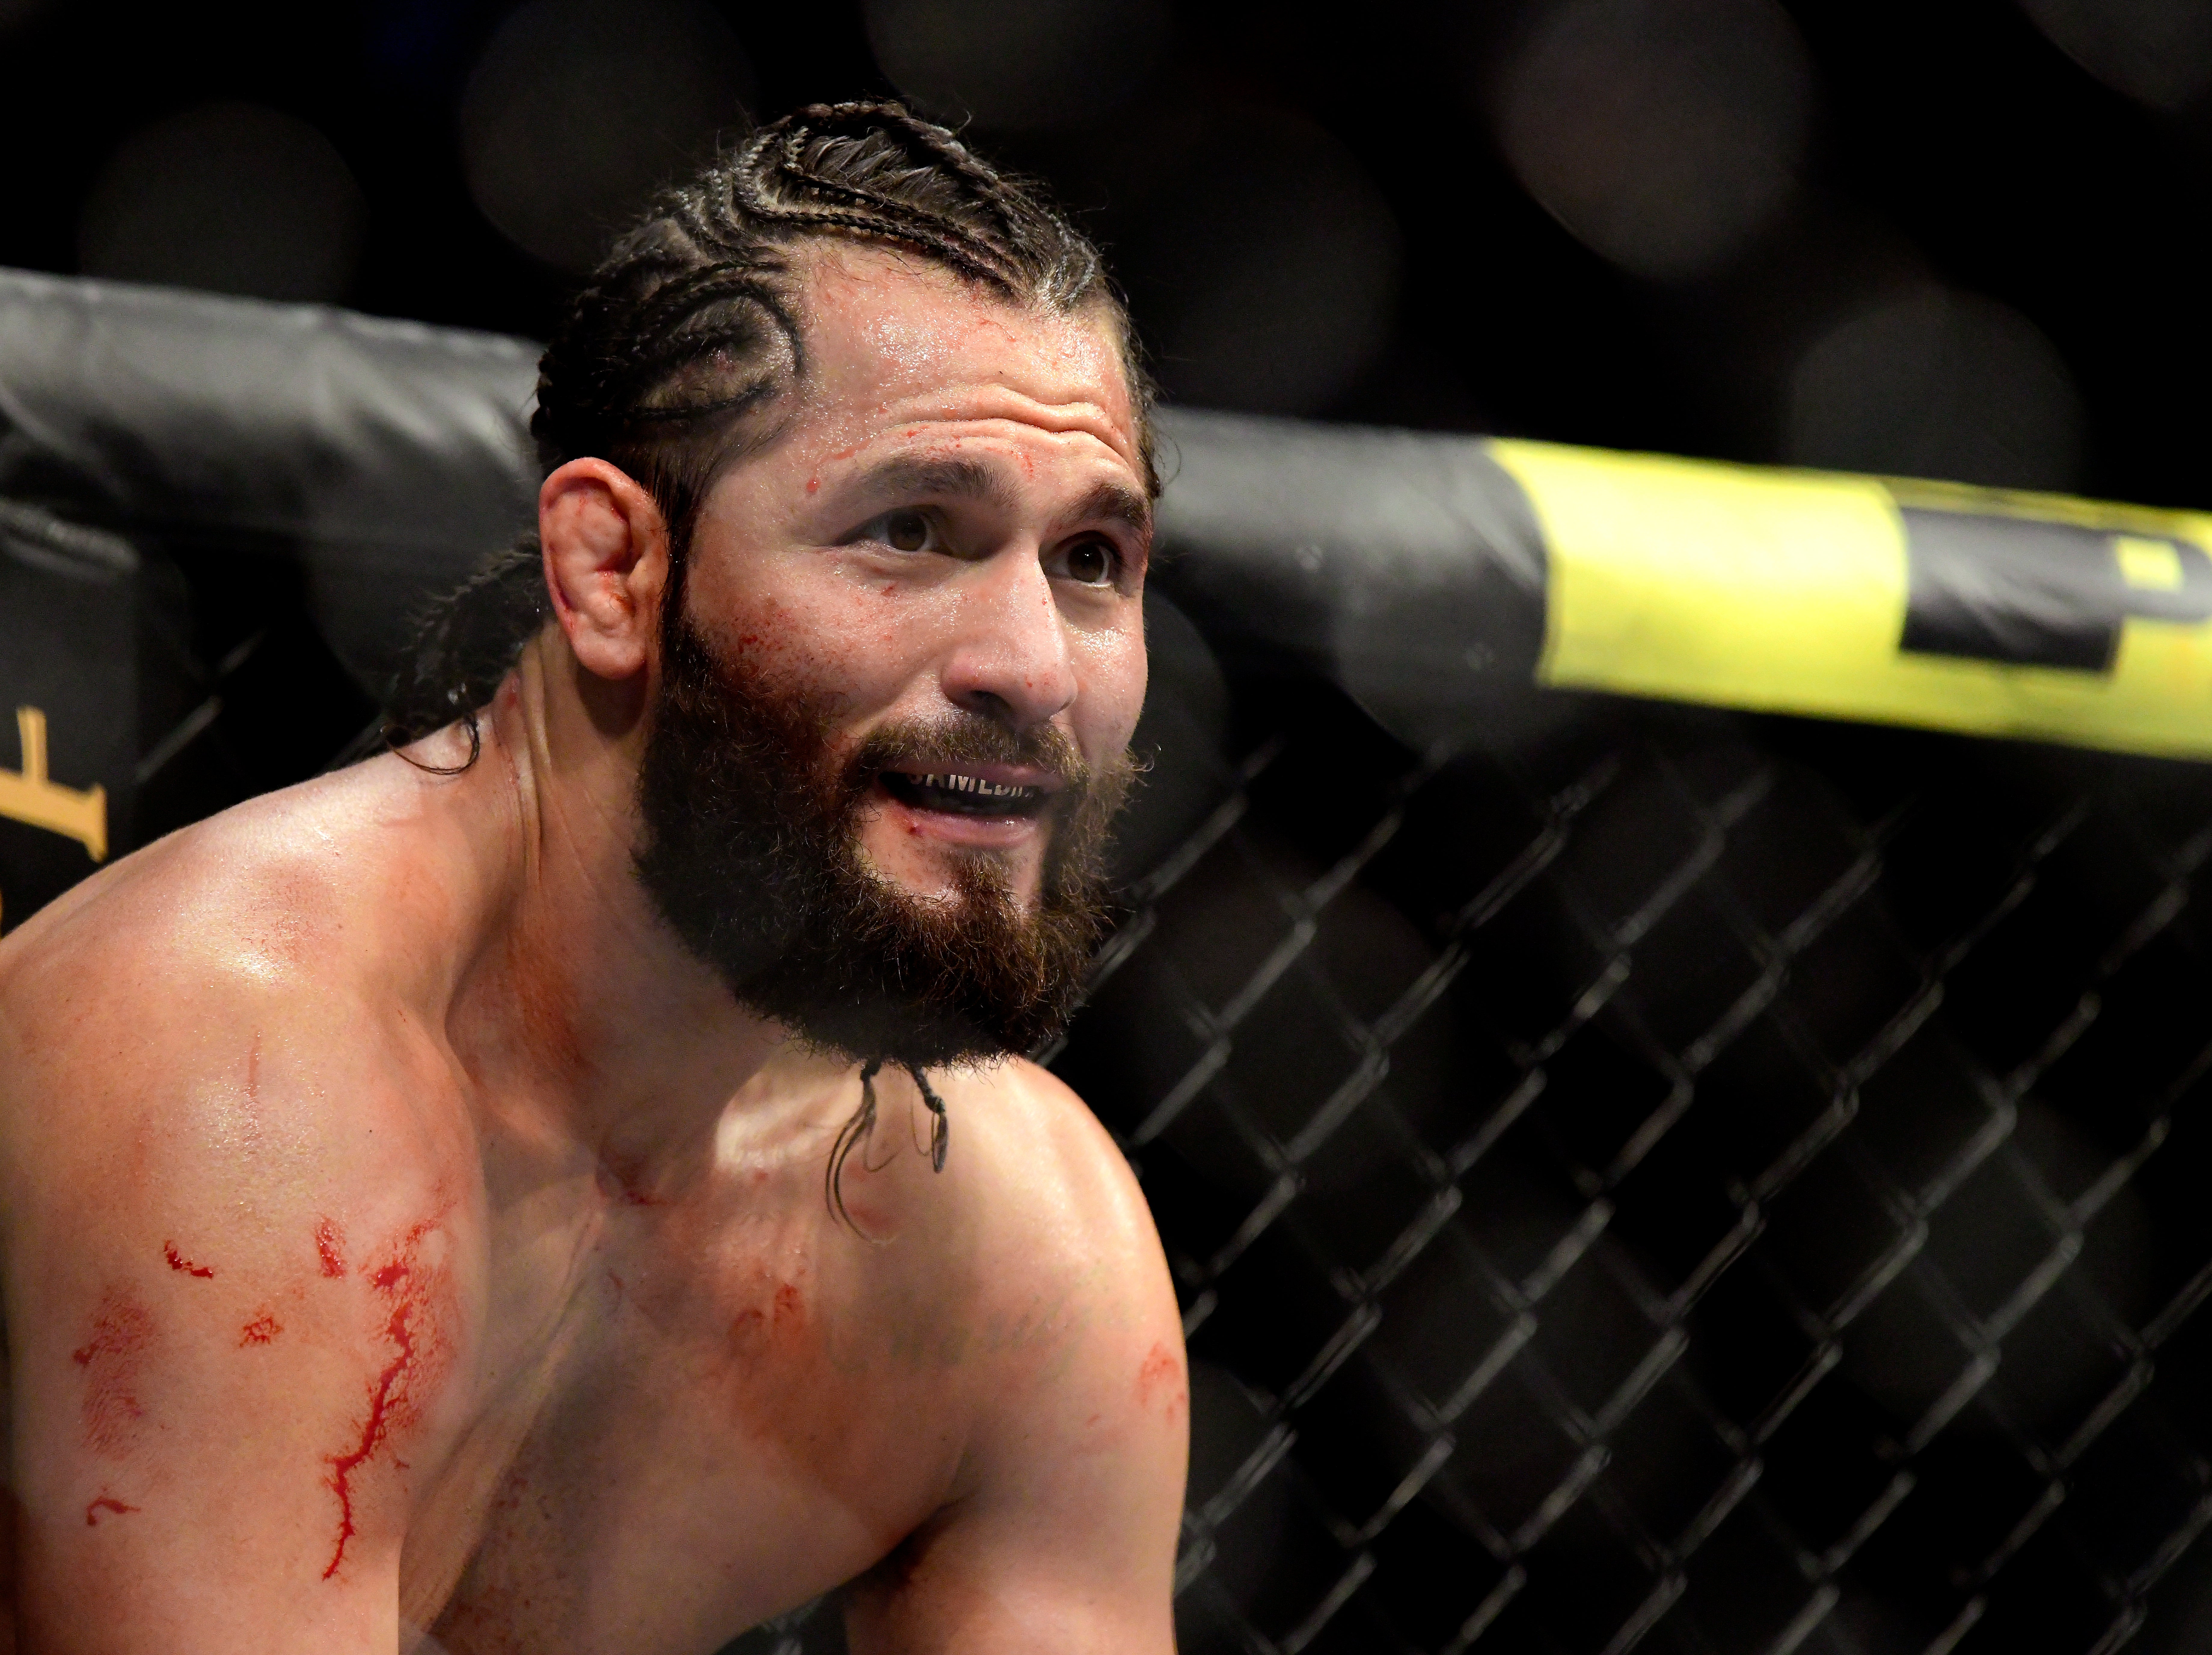 MMA Fighting's 2019 Knockout of the Year: Jorge Masvidal rocks Ben